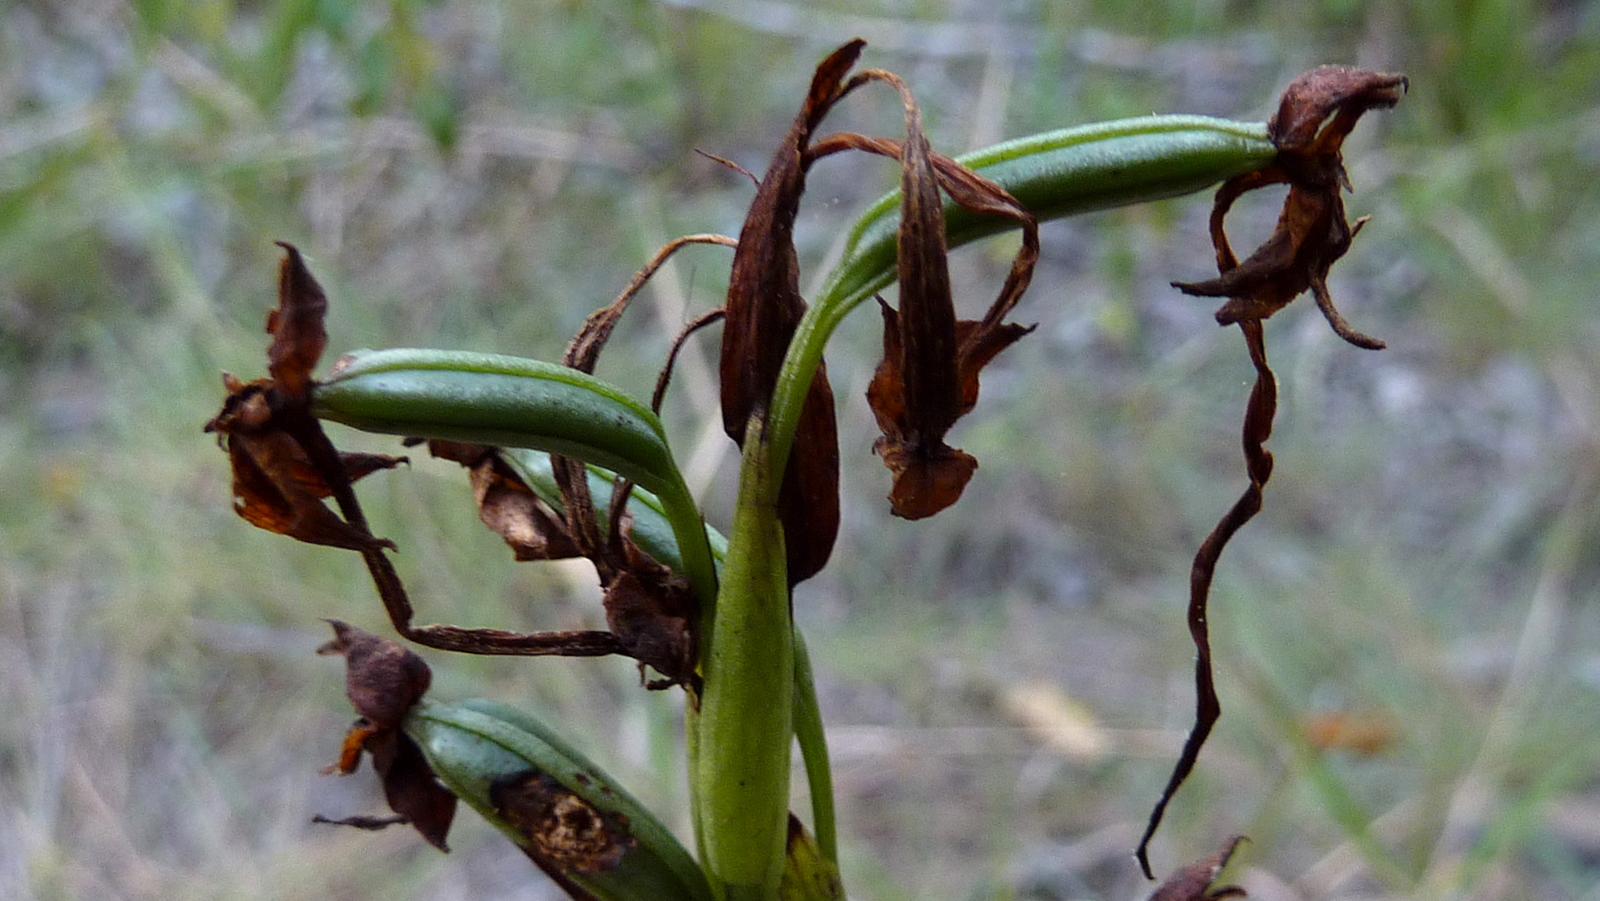 an unripe plant with leaves growing in the grass